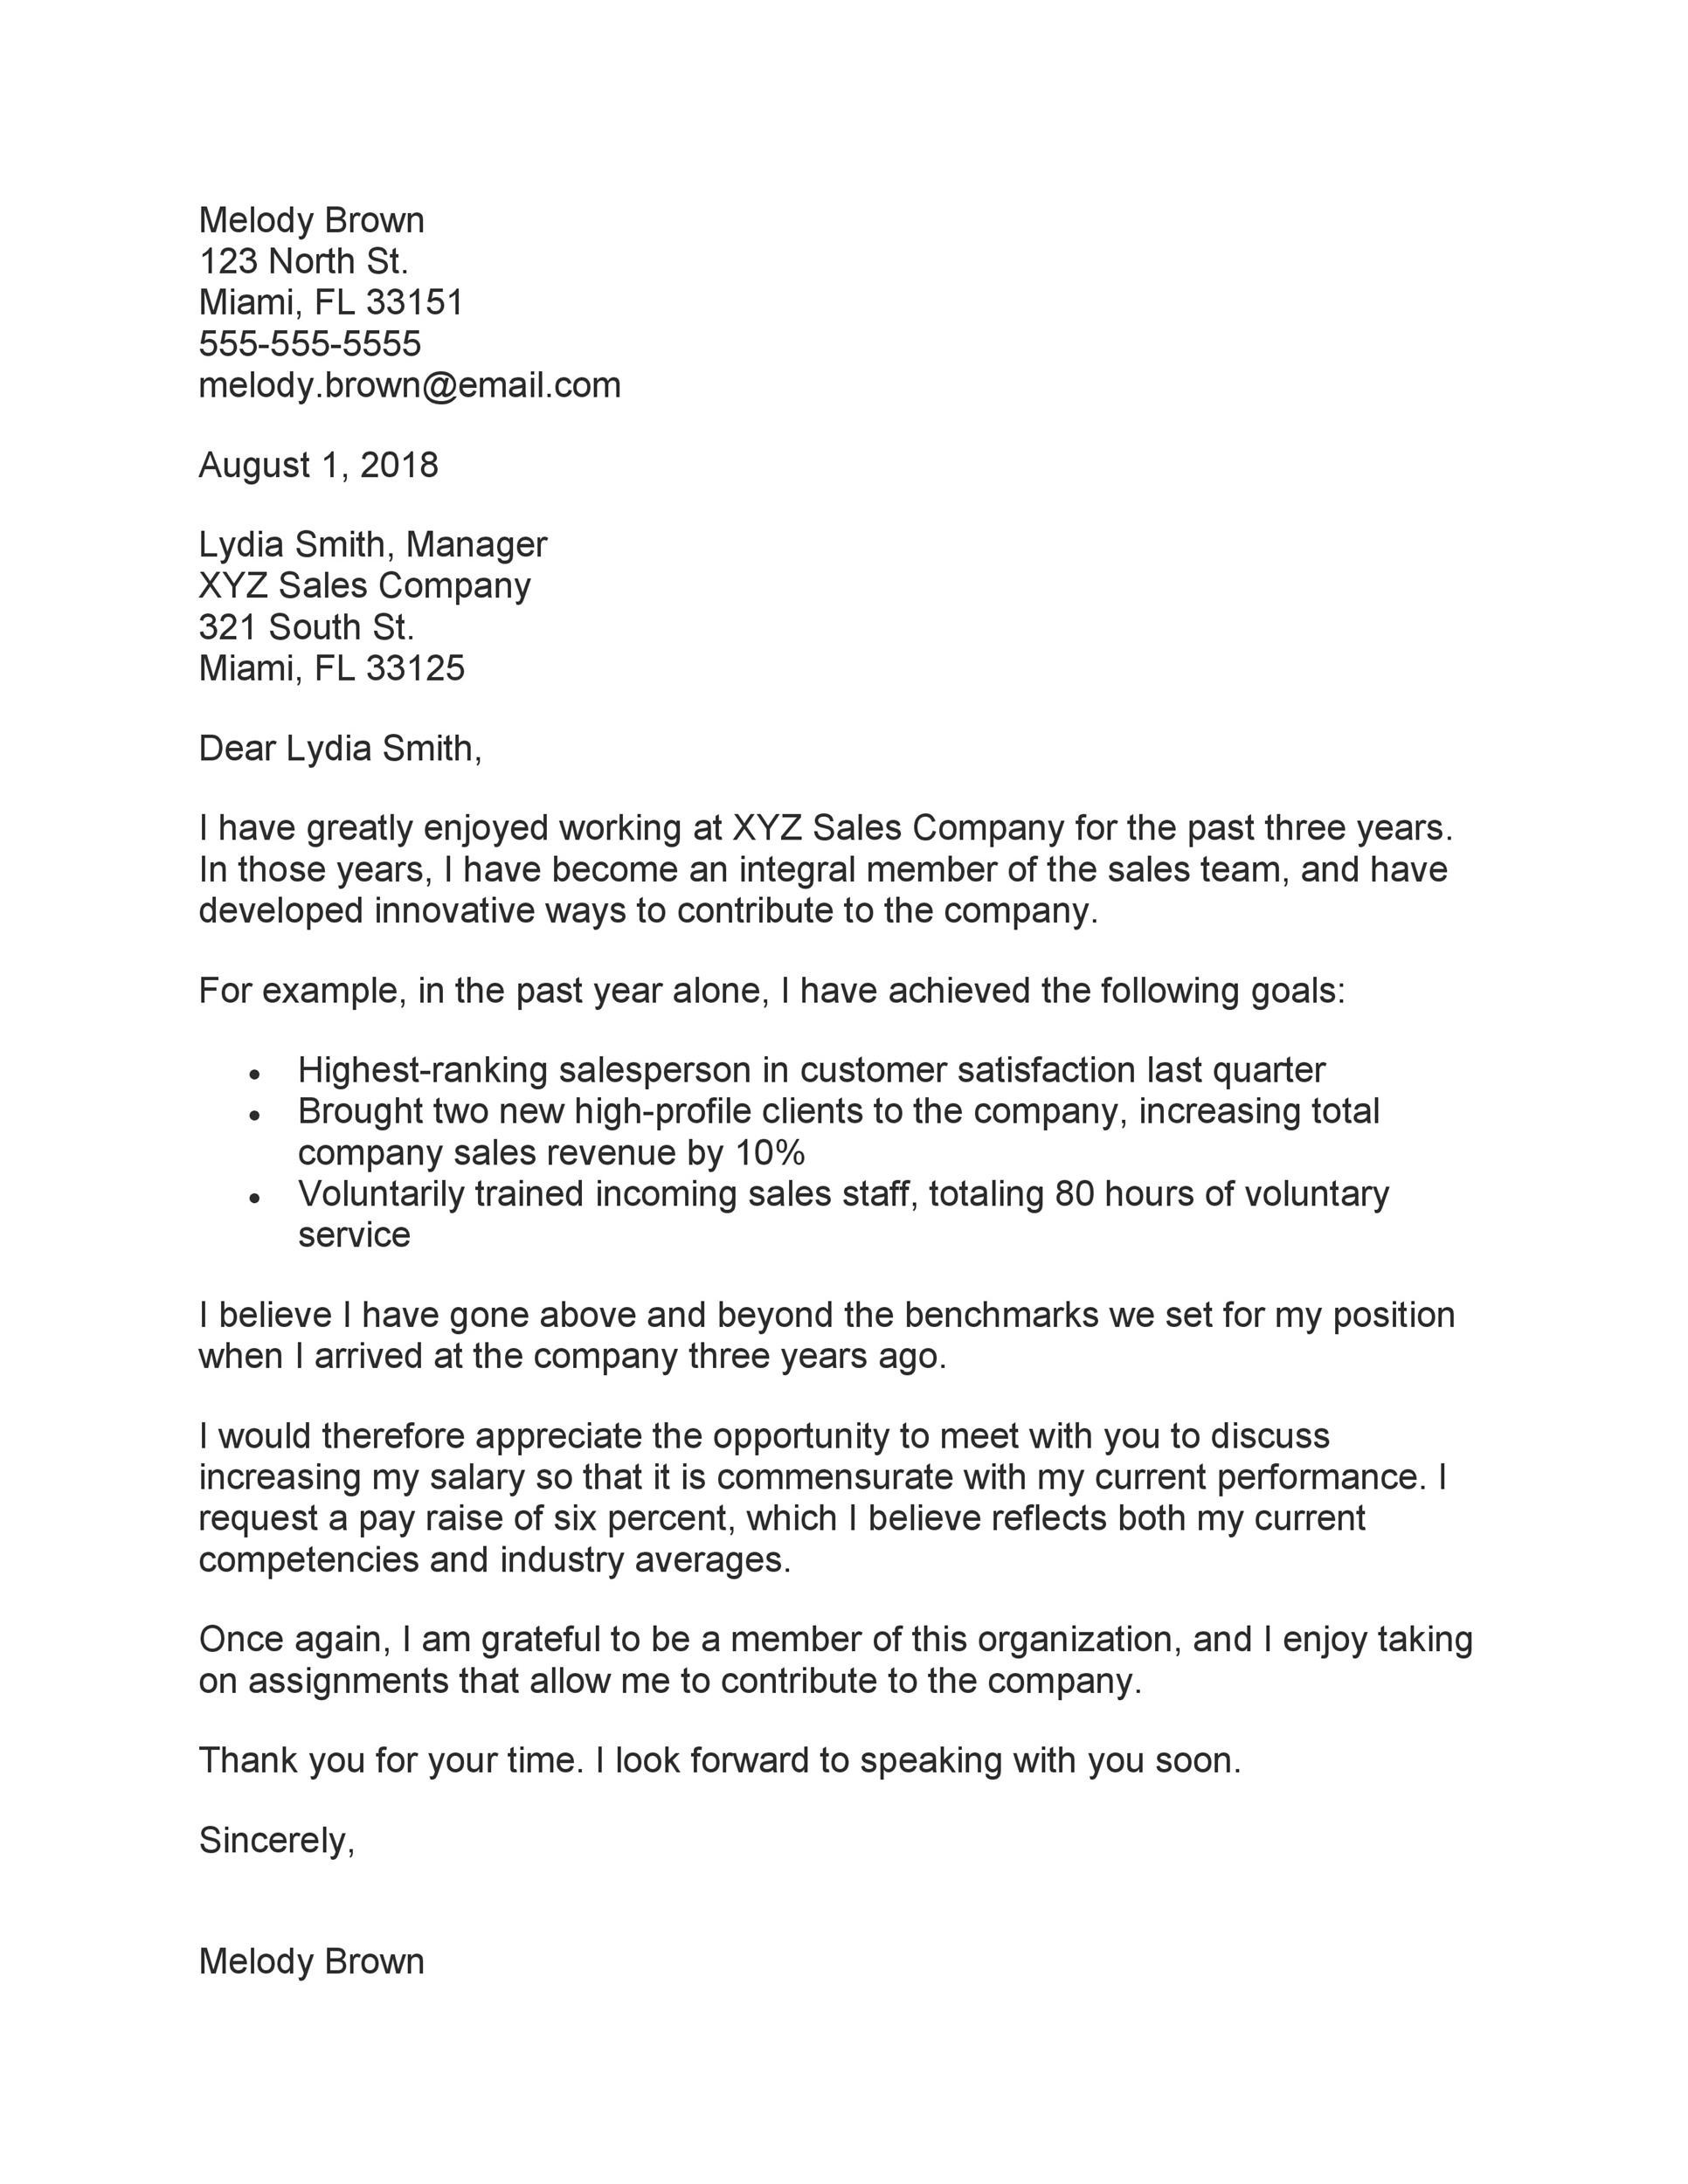 Sample Letter Requesting A Pay Raise from templatelab.com